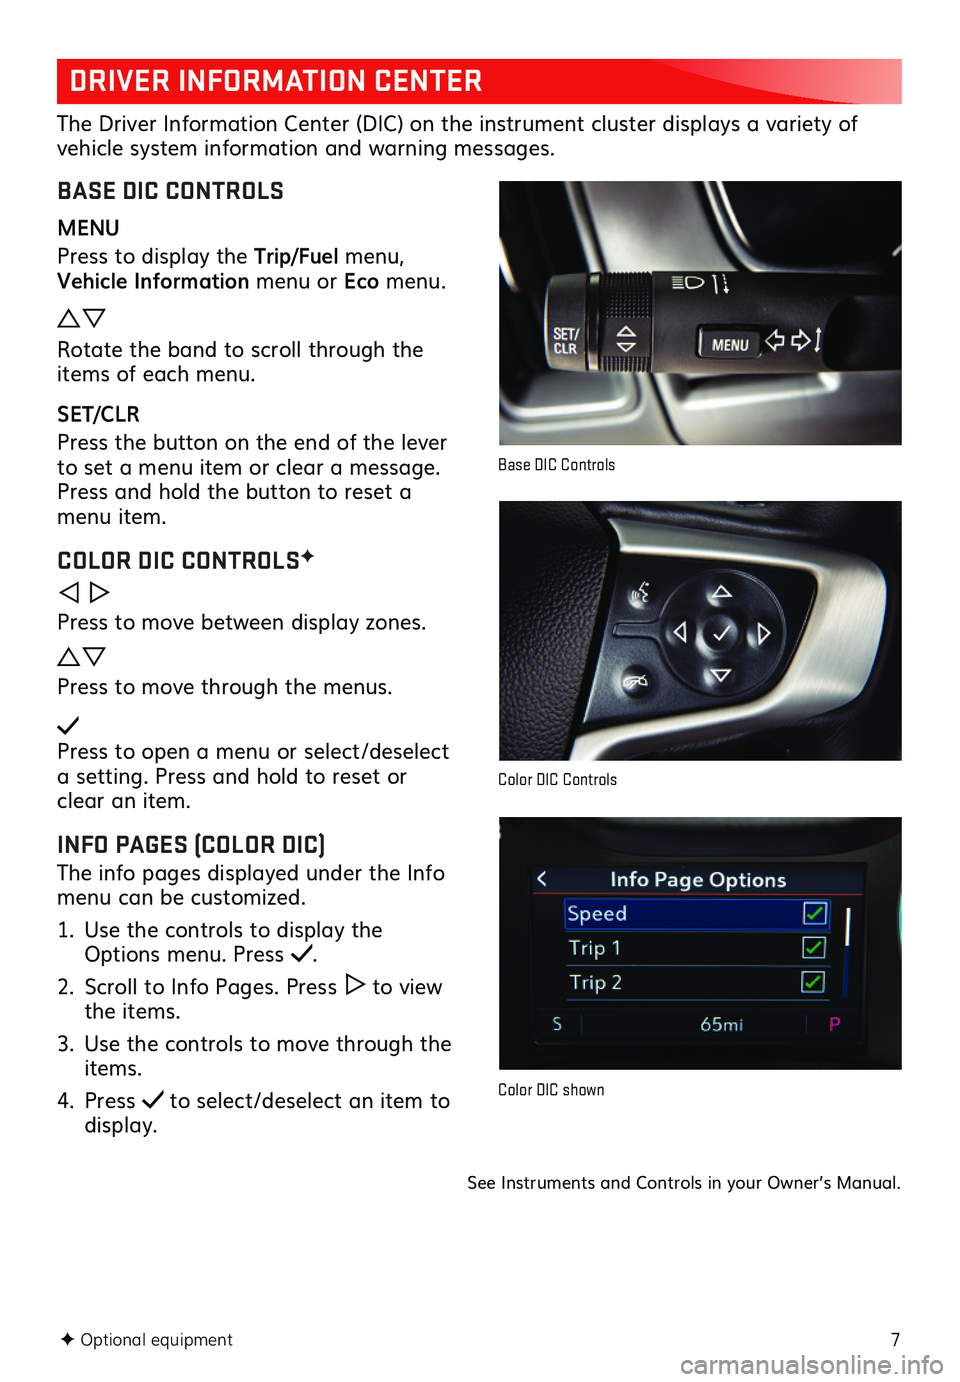 GMC CANYON 2021  Get To Know Guide 7
DRIVER INFORMATION CENTER
The Driver Information Center (DIC) on the instrument cluster displays a variety of vehicle system information and warning messages. 
BASE DIC CONTROLS
MENU
Press to displa